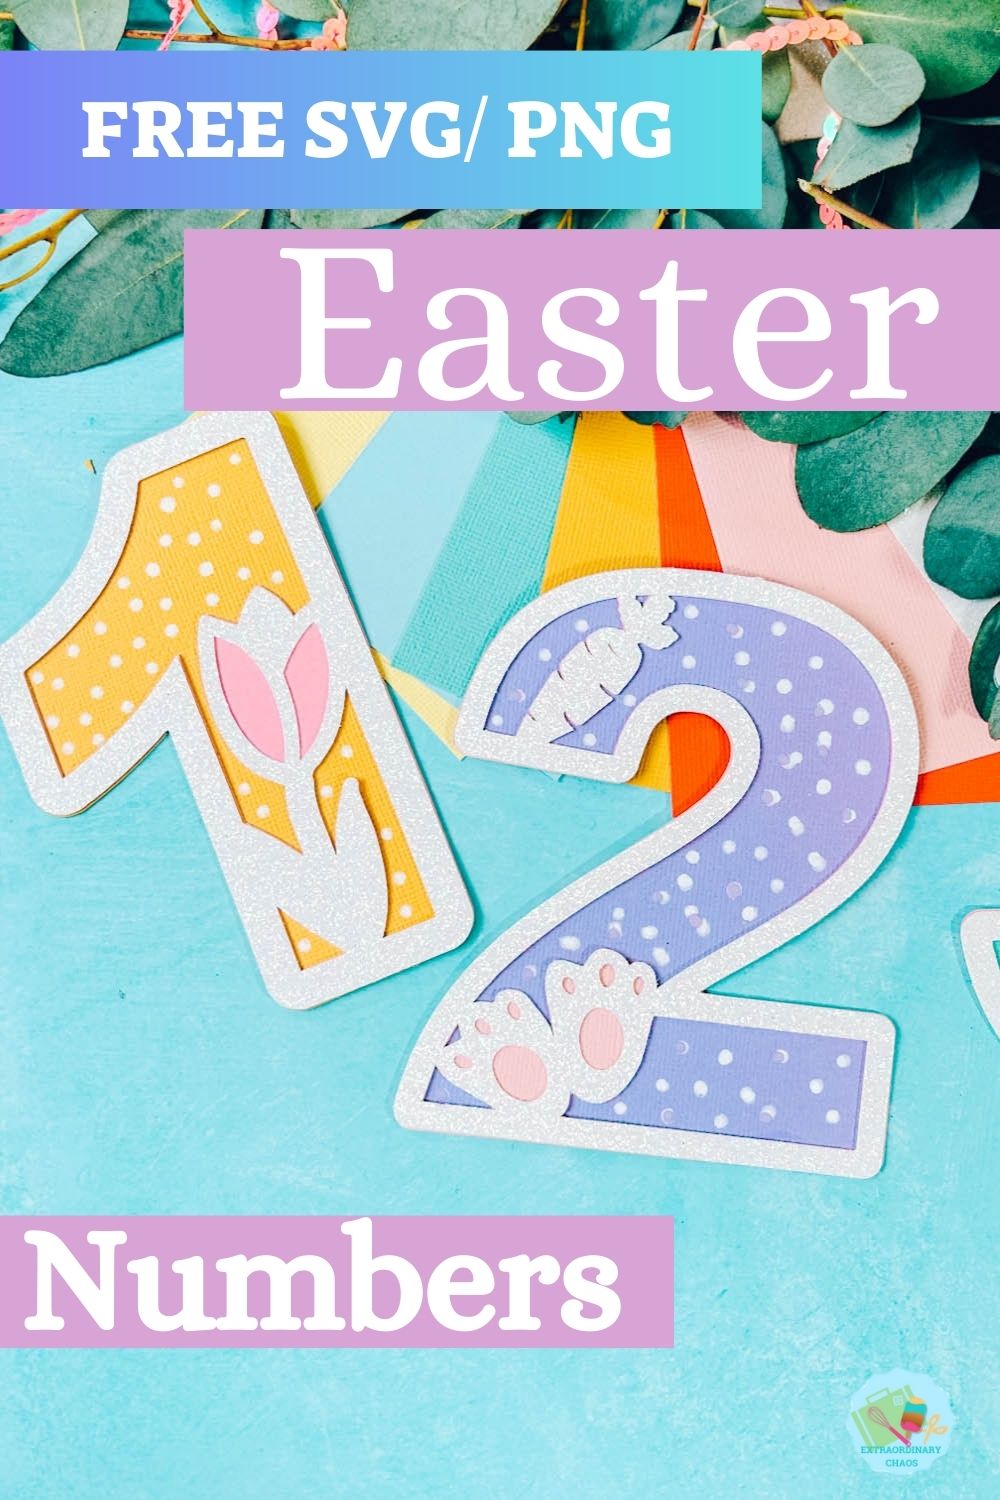 Free SVG PNG Easter Numers for Cricut and Silhouette